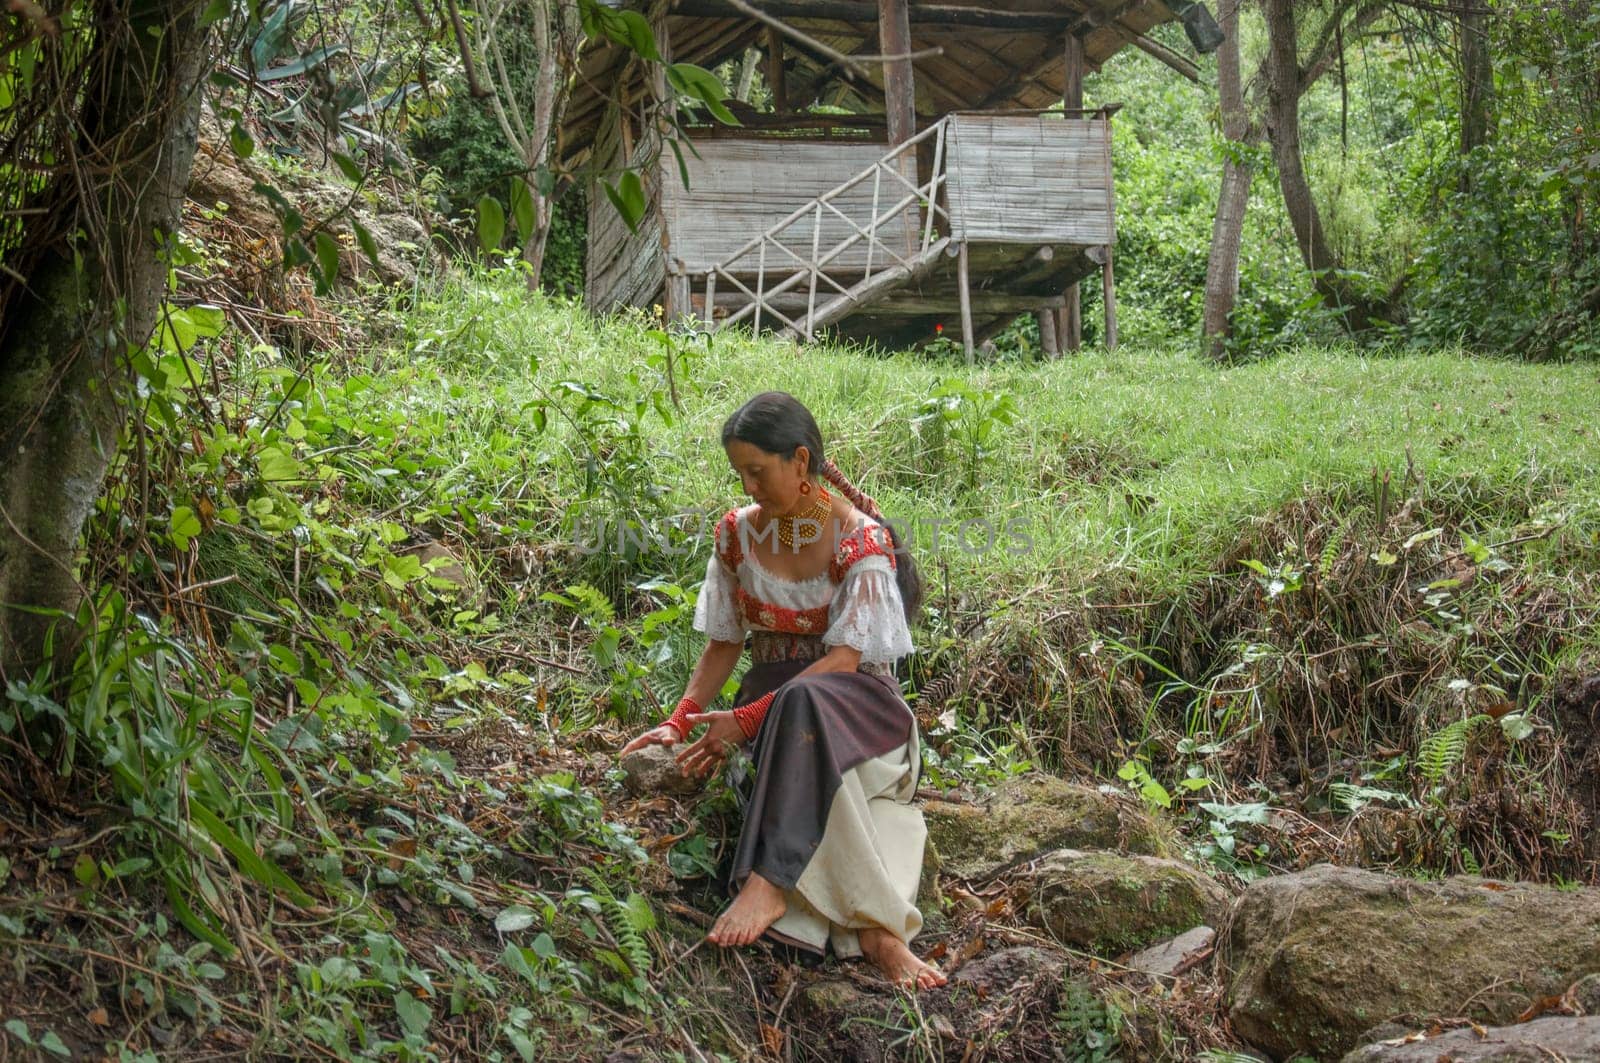 community of ancestral shamans outdoors, woman collects medicinal plants to prepare a spiritual healing ceremony. High quality photo